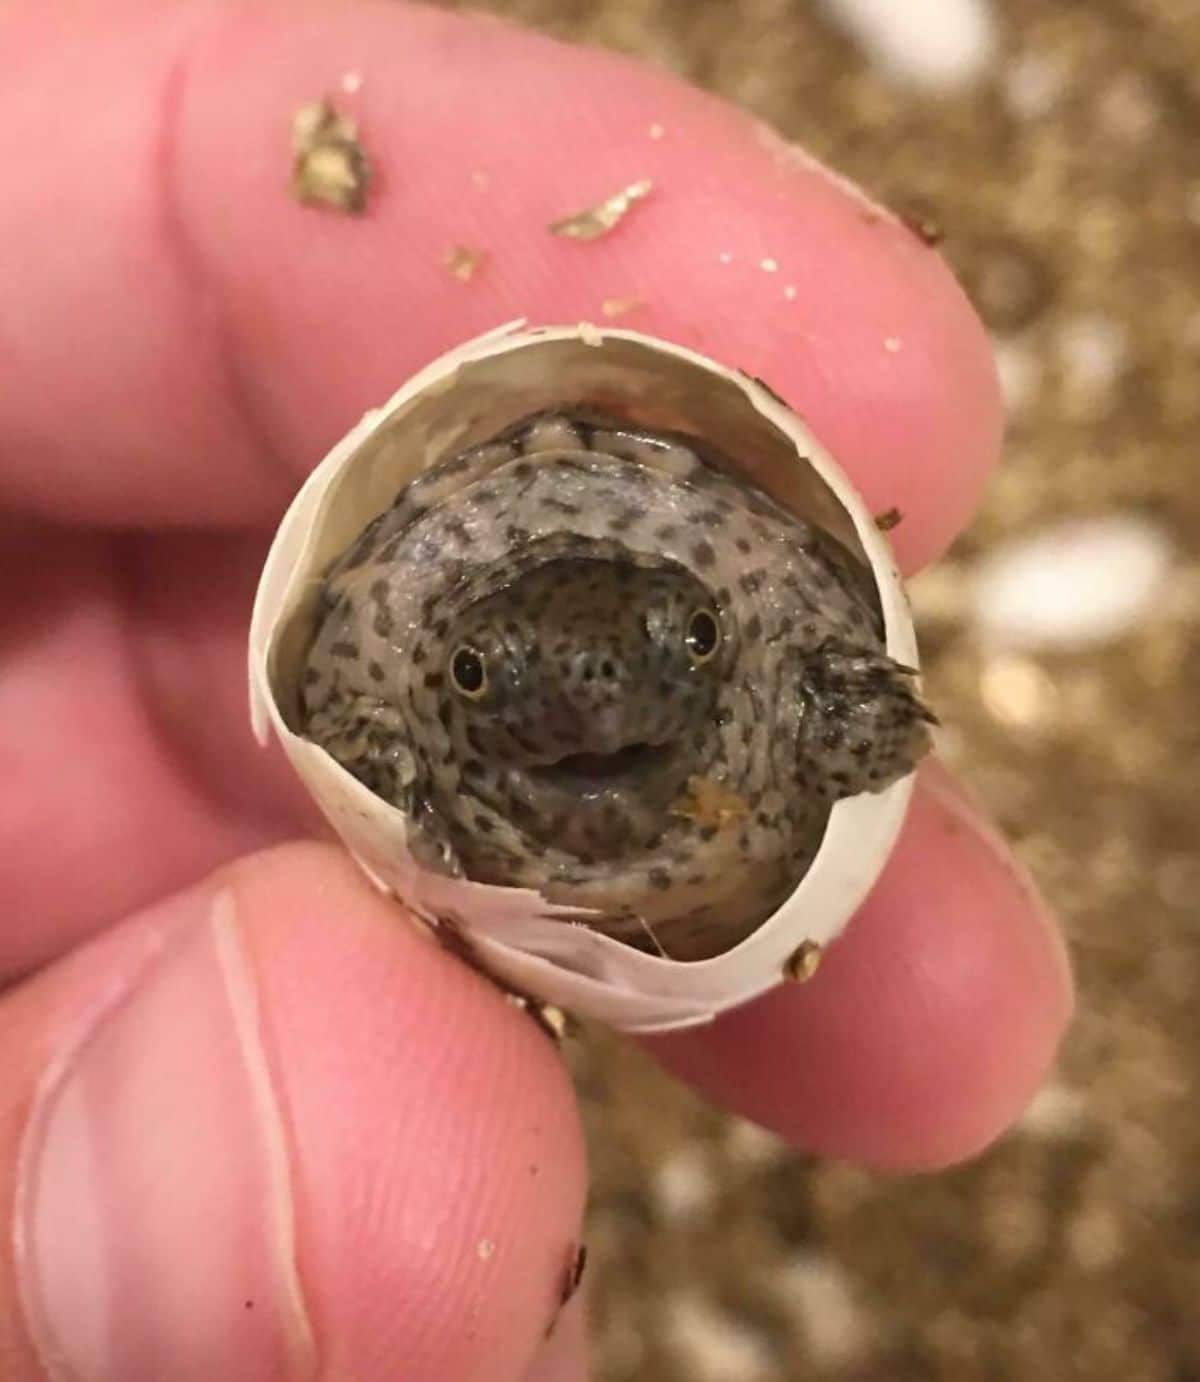 baby turtle hatching out of its egg with the egg being held in someone's hand